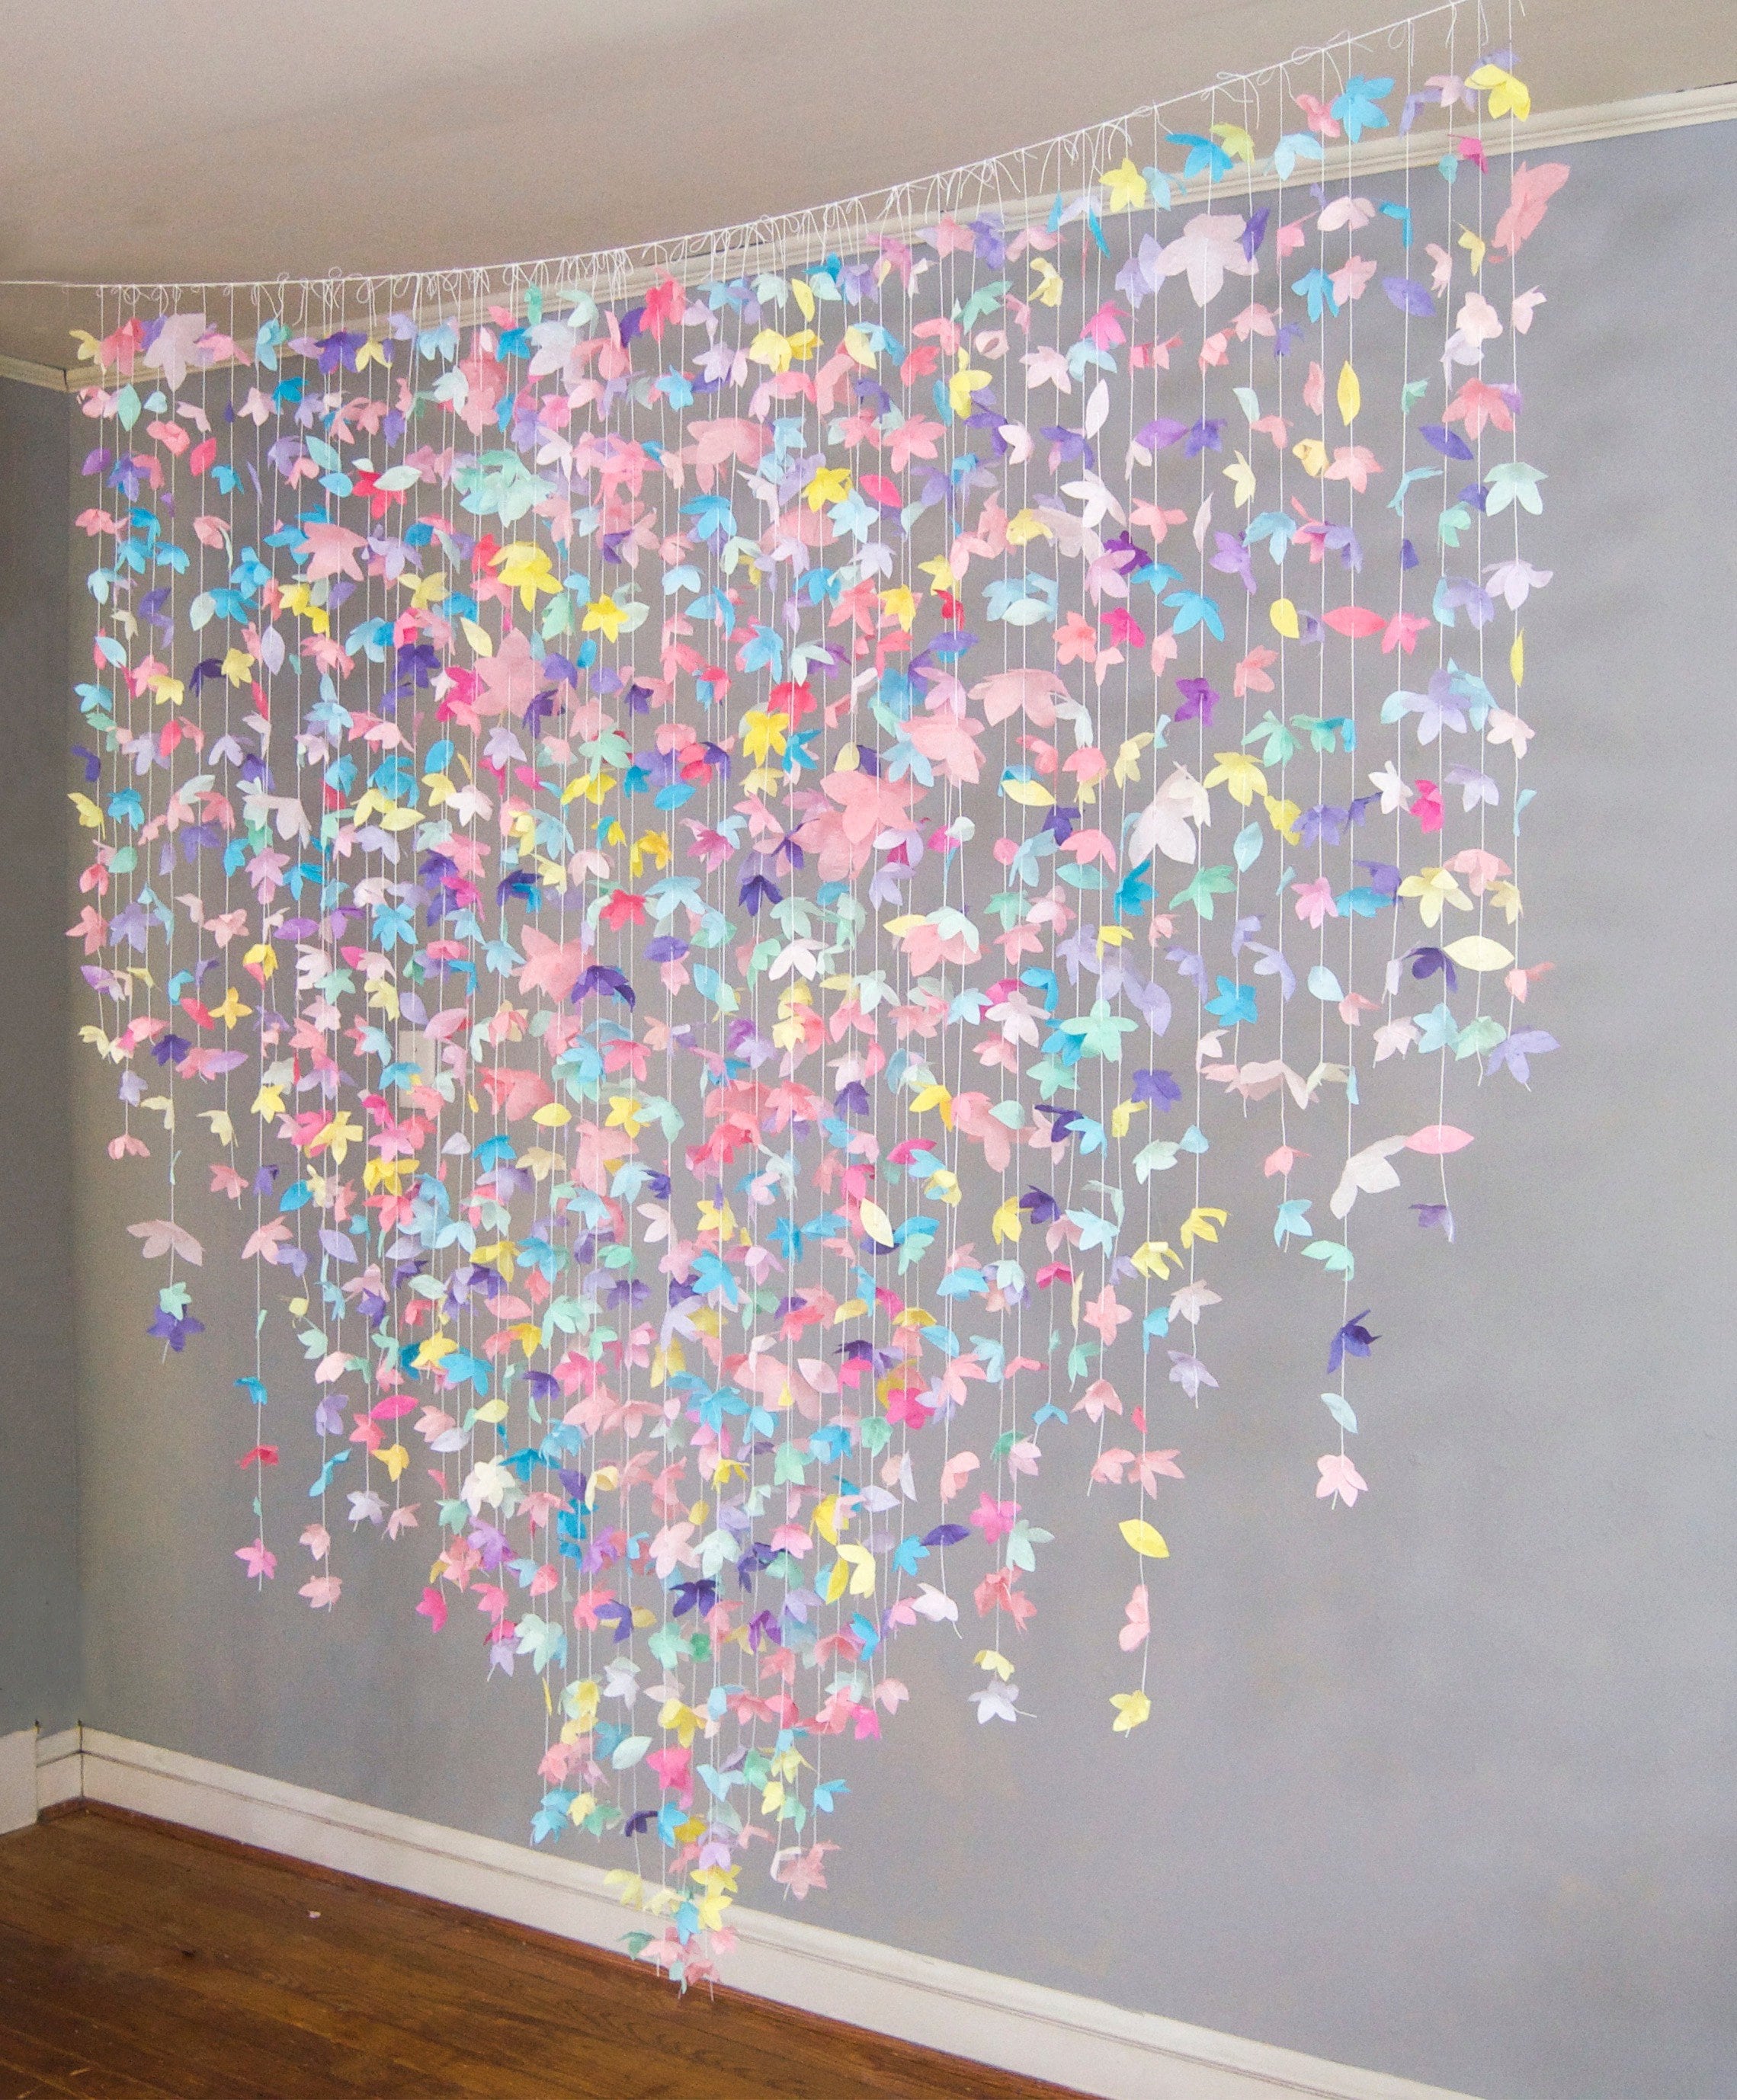 Cascading Paper Flower Garland - PaperPapers Blog